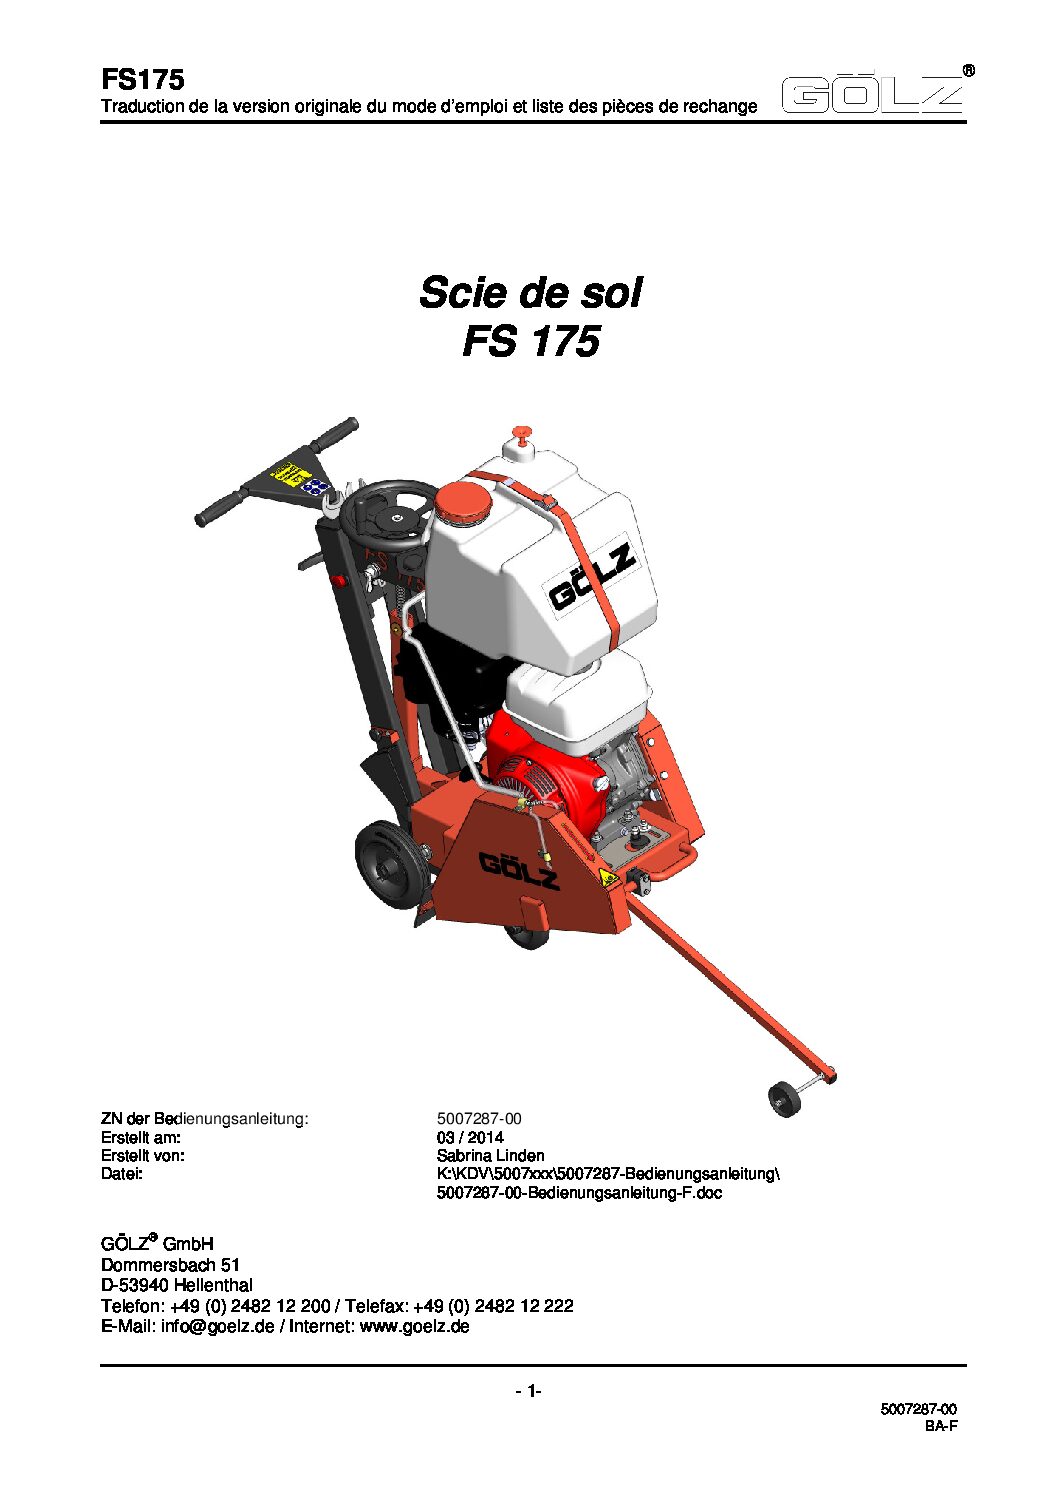 Golz Floor Saw GOFS175-18” Users Guide French